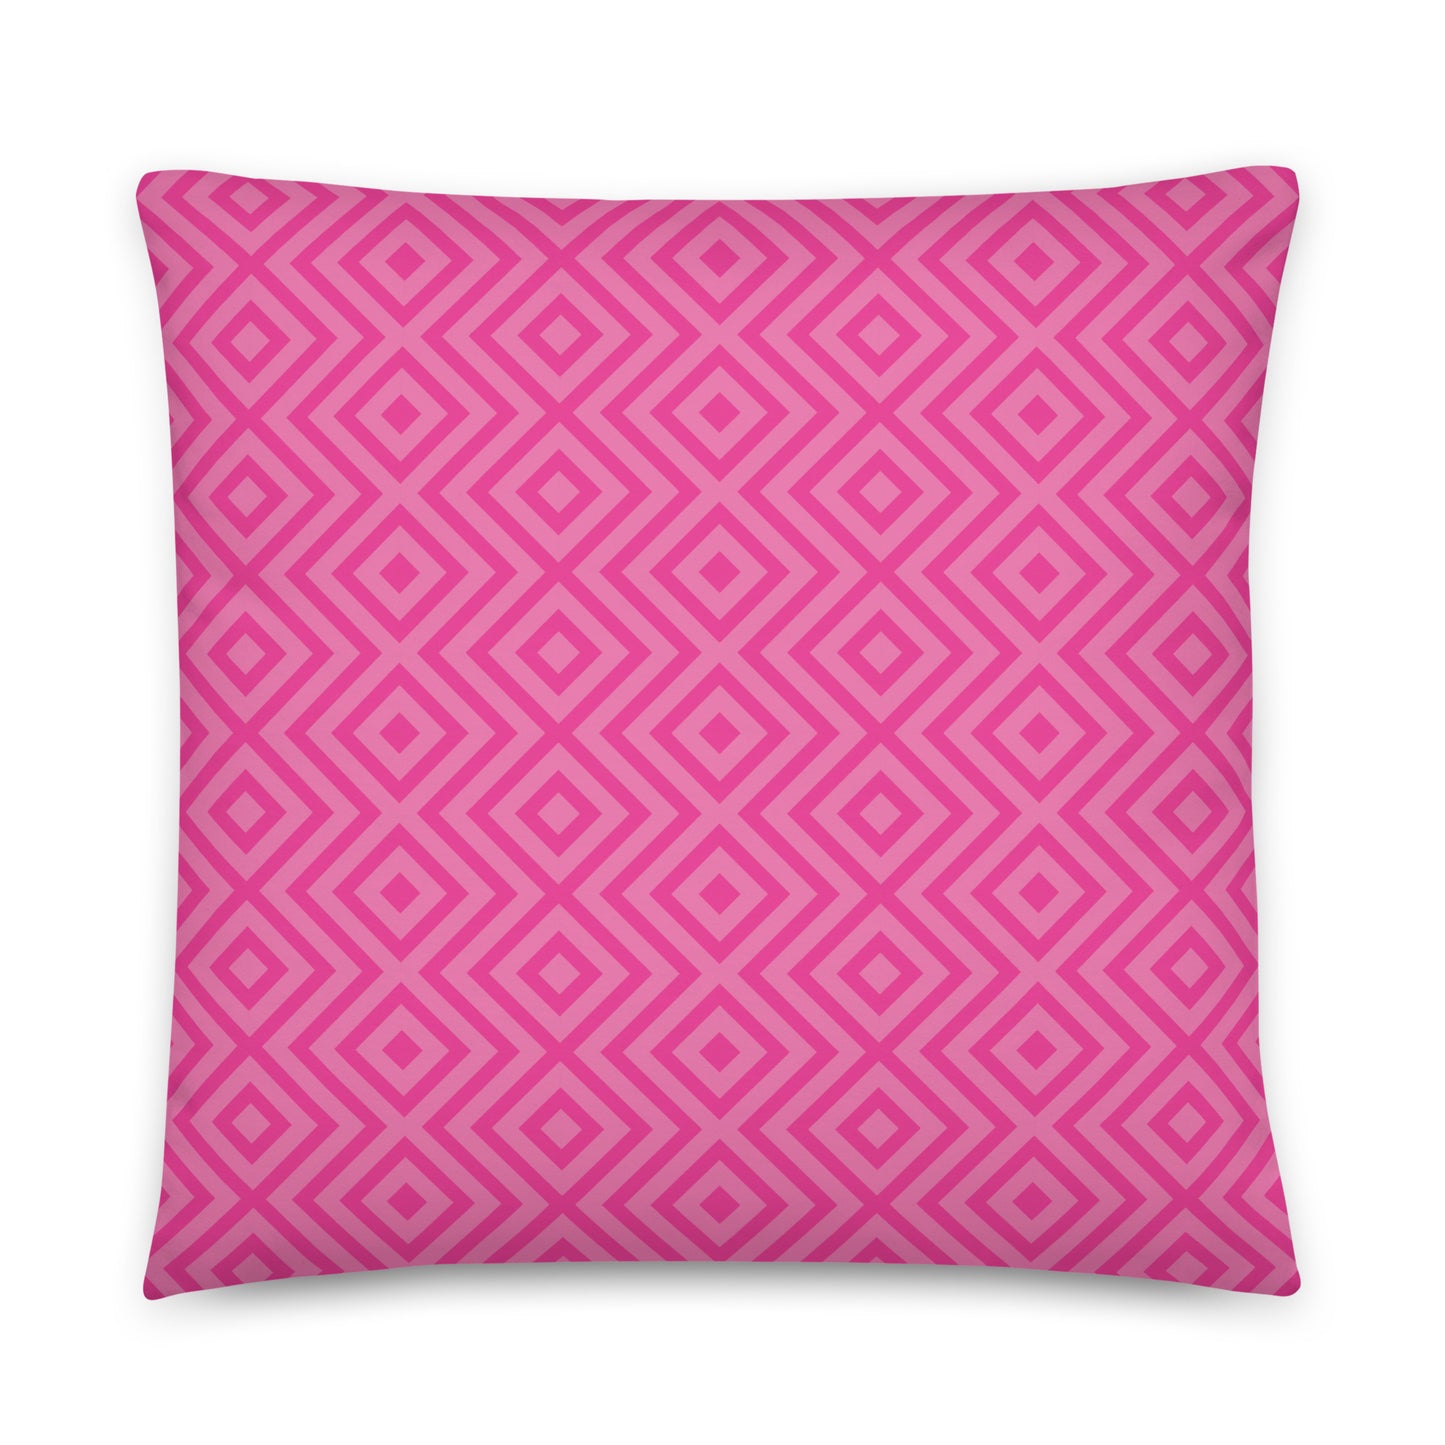 Neon Pink - Sustainably Made Pillows